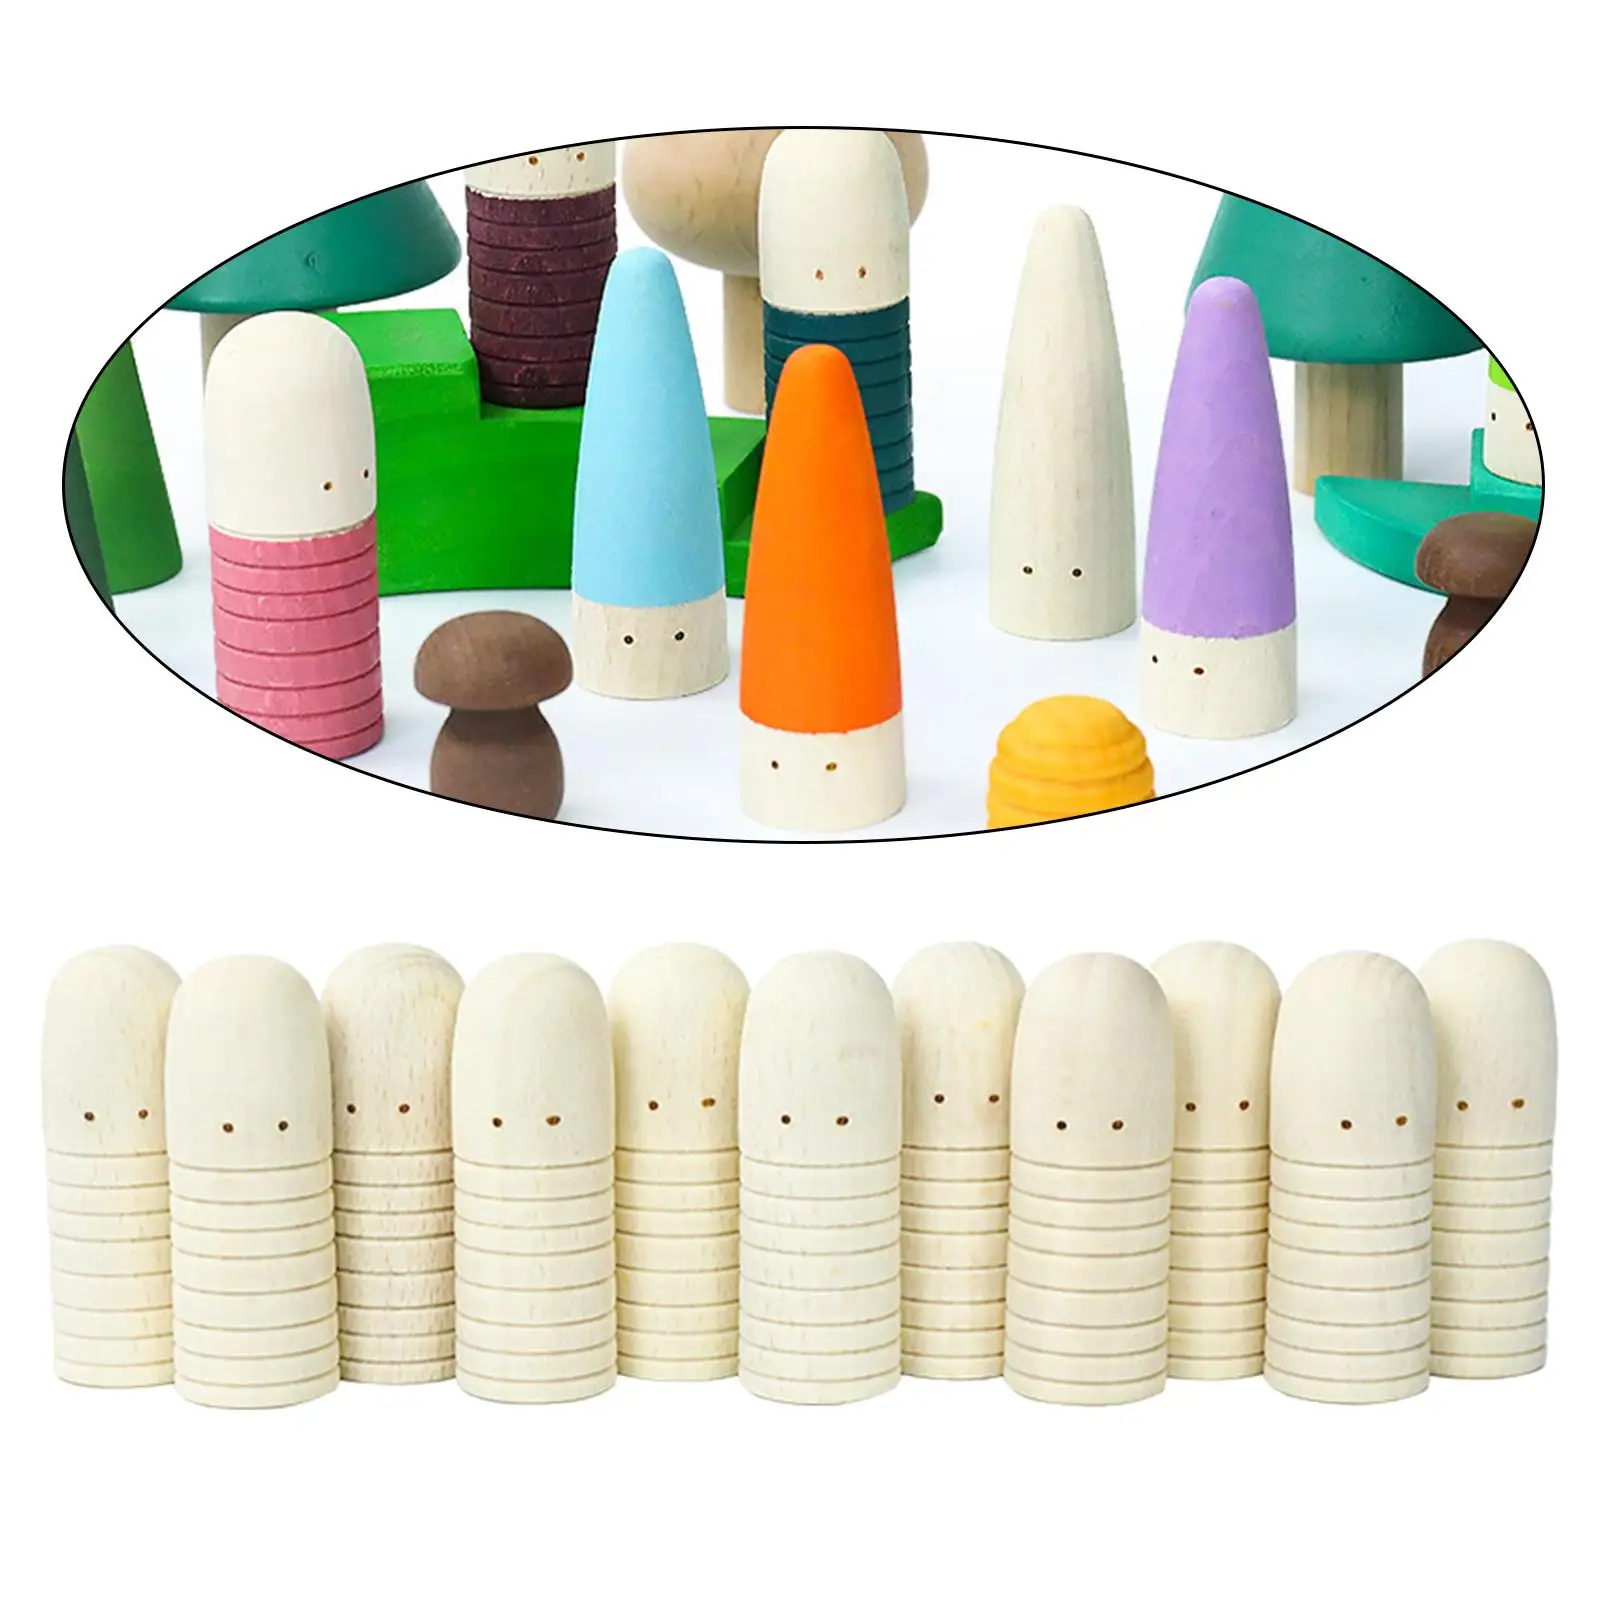 Wooden Mini Doll Building Blocks, Color Shape Matching Educational Learning Toys for Kids Toddlers Boys and Girls